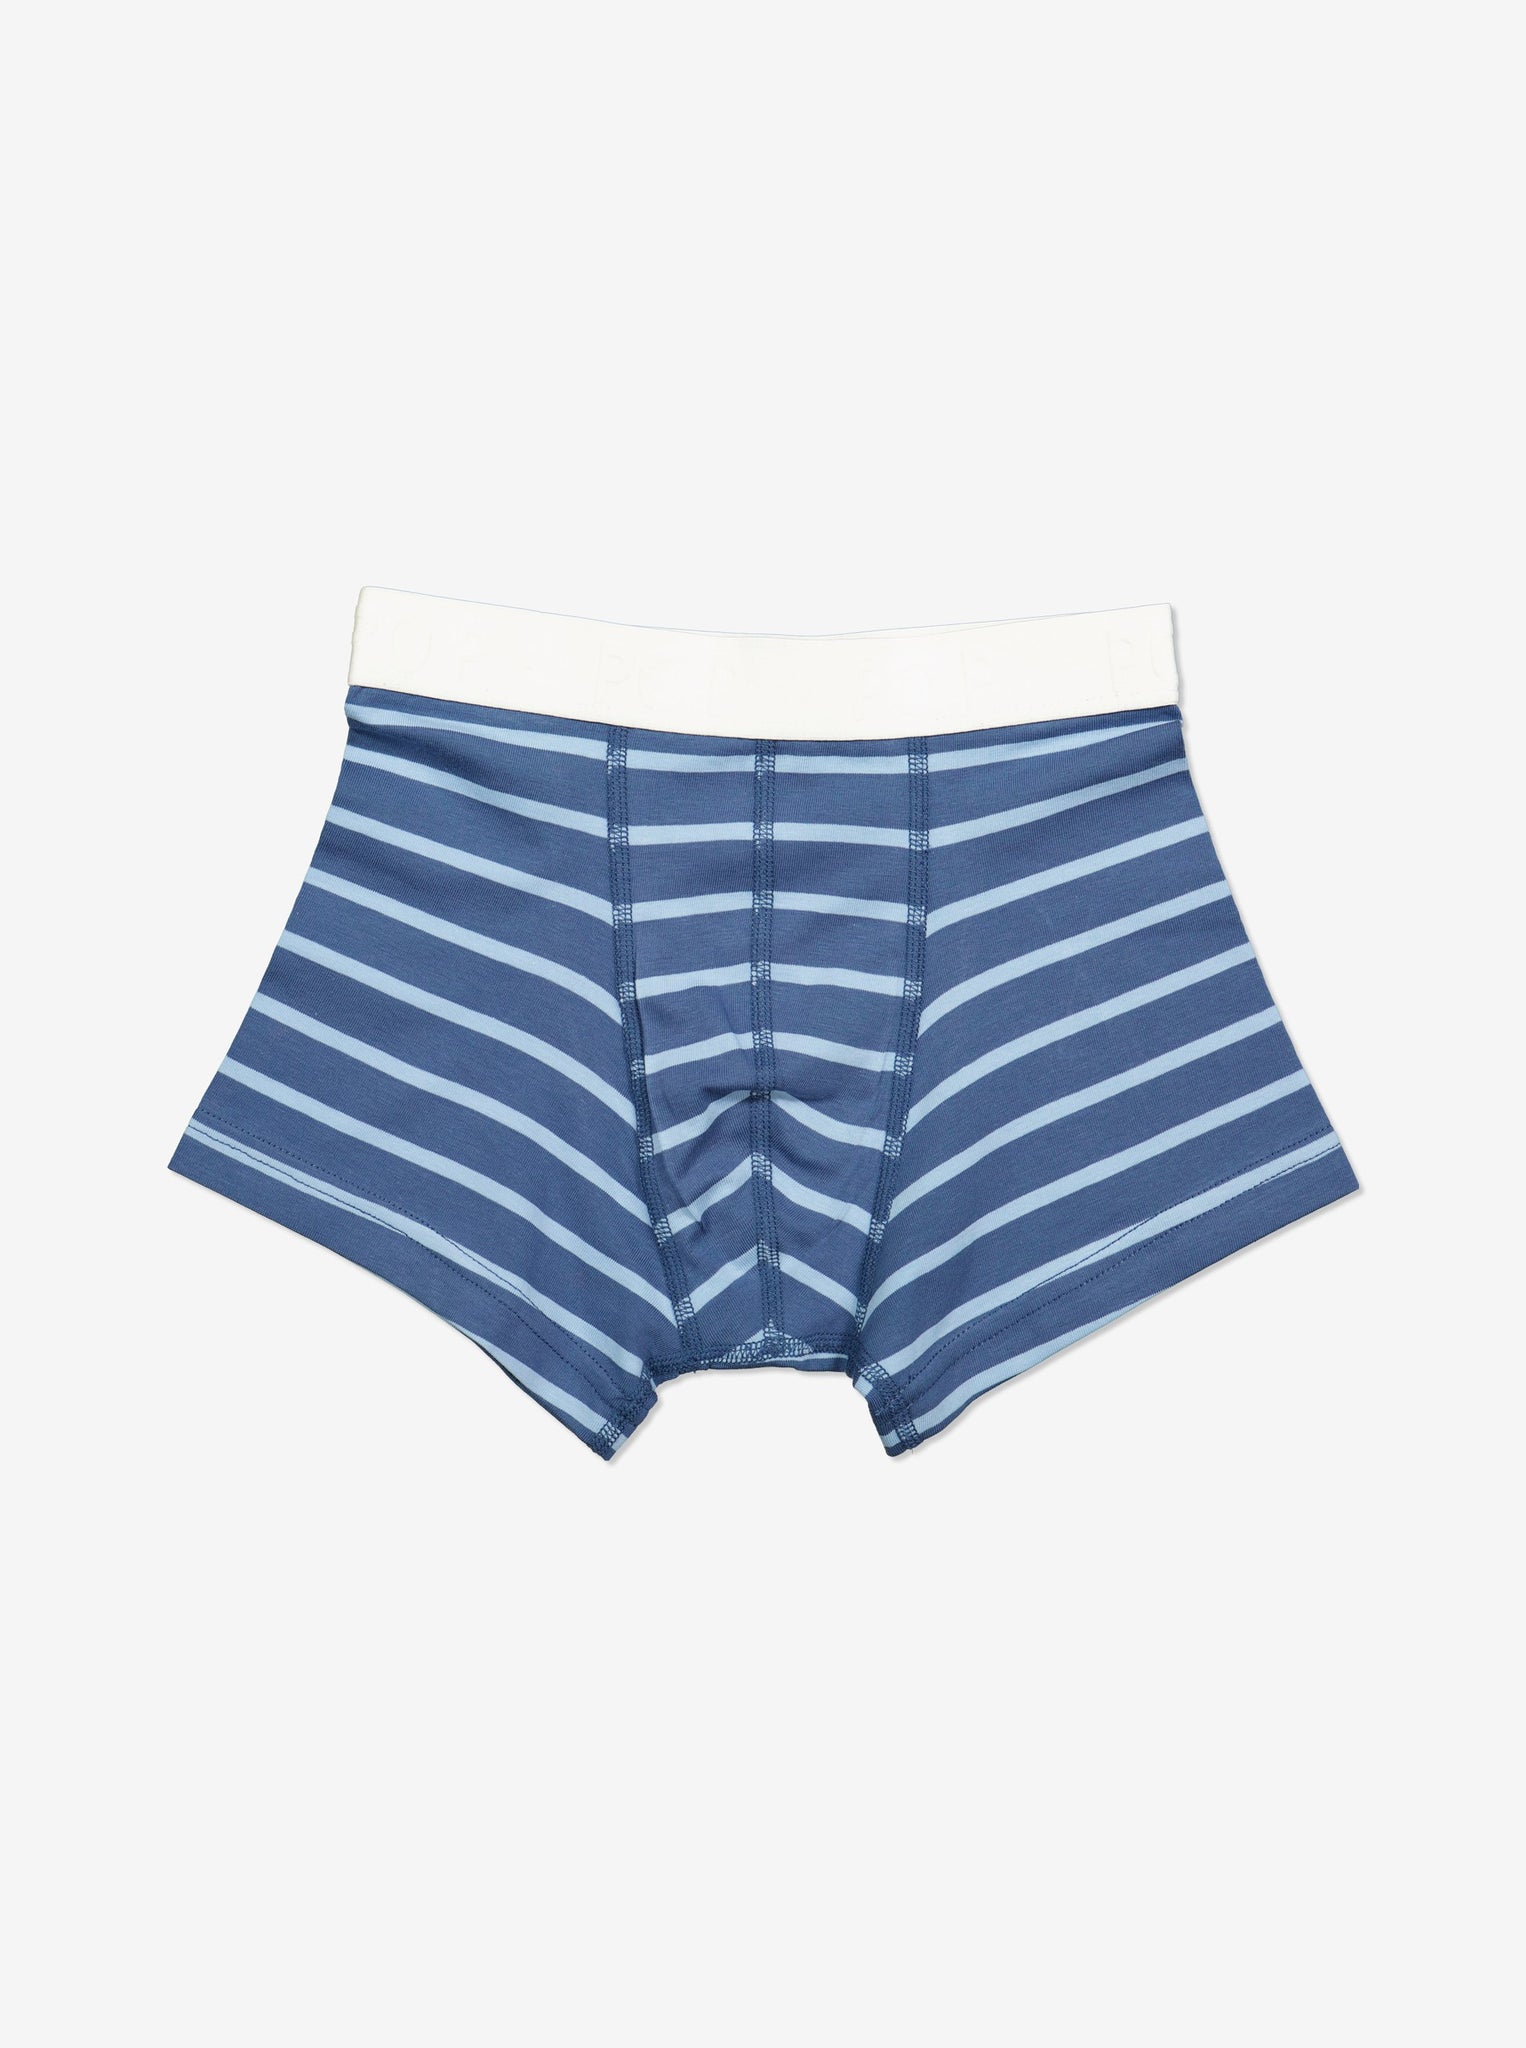  Organic Blue Boys Boxer Shorts from Polarn O. Pyret Kidswear. Made from ethically sourced materials.